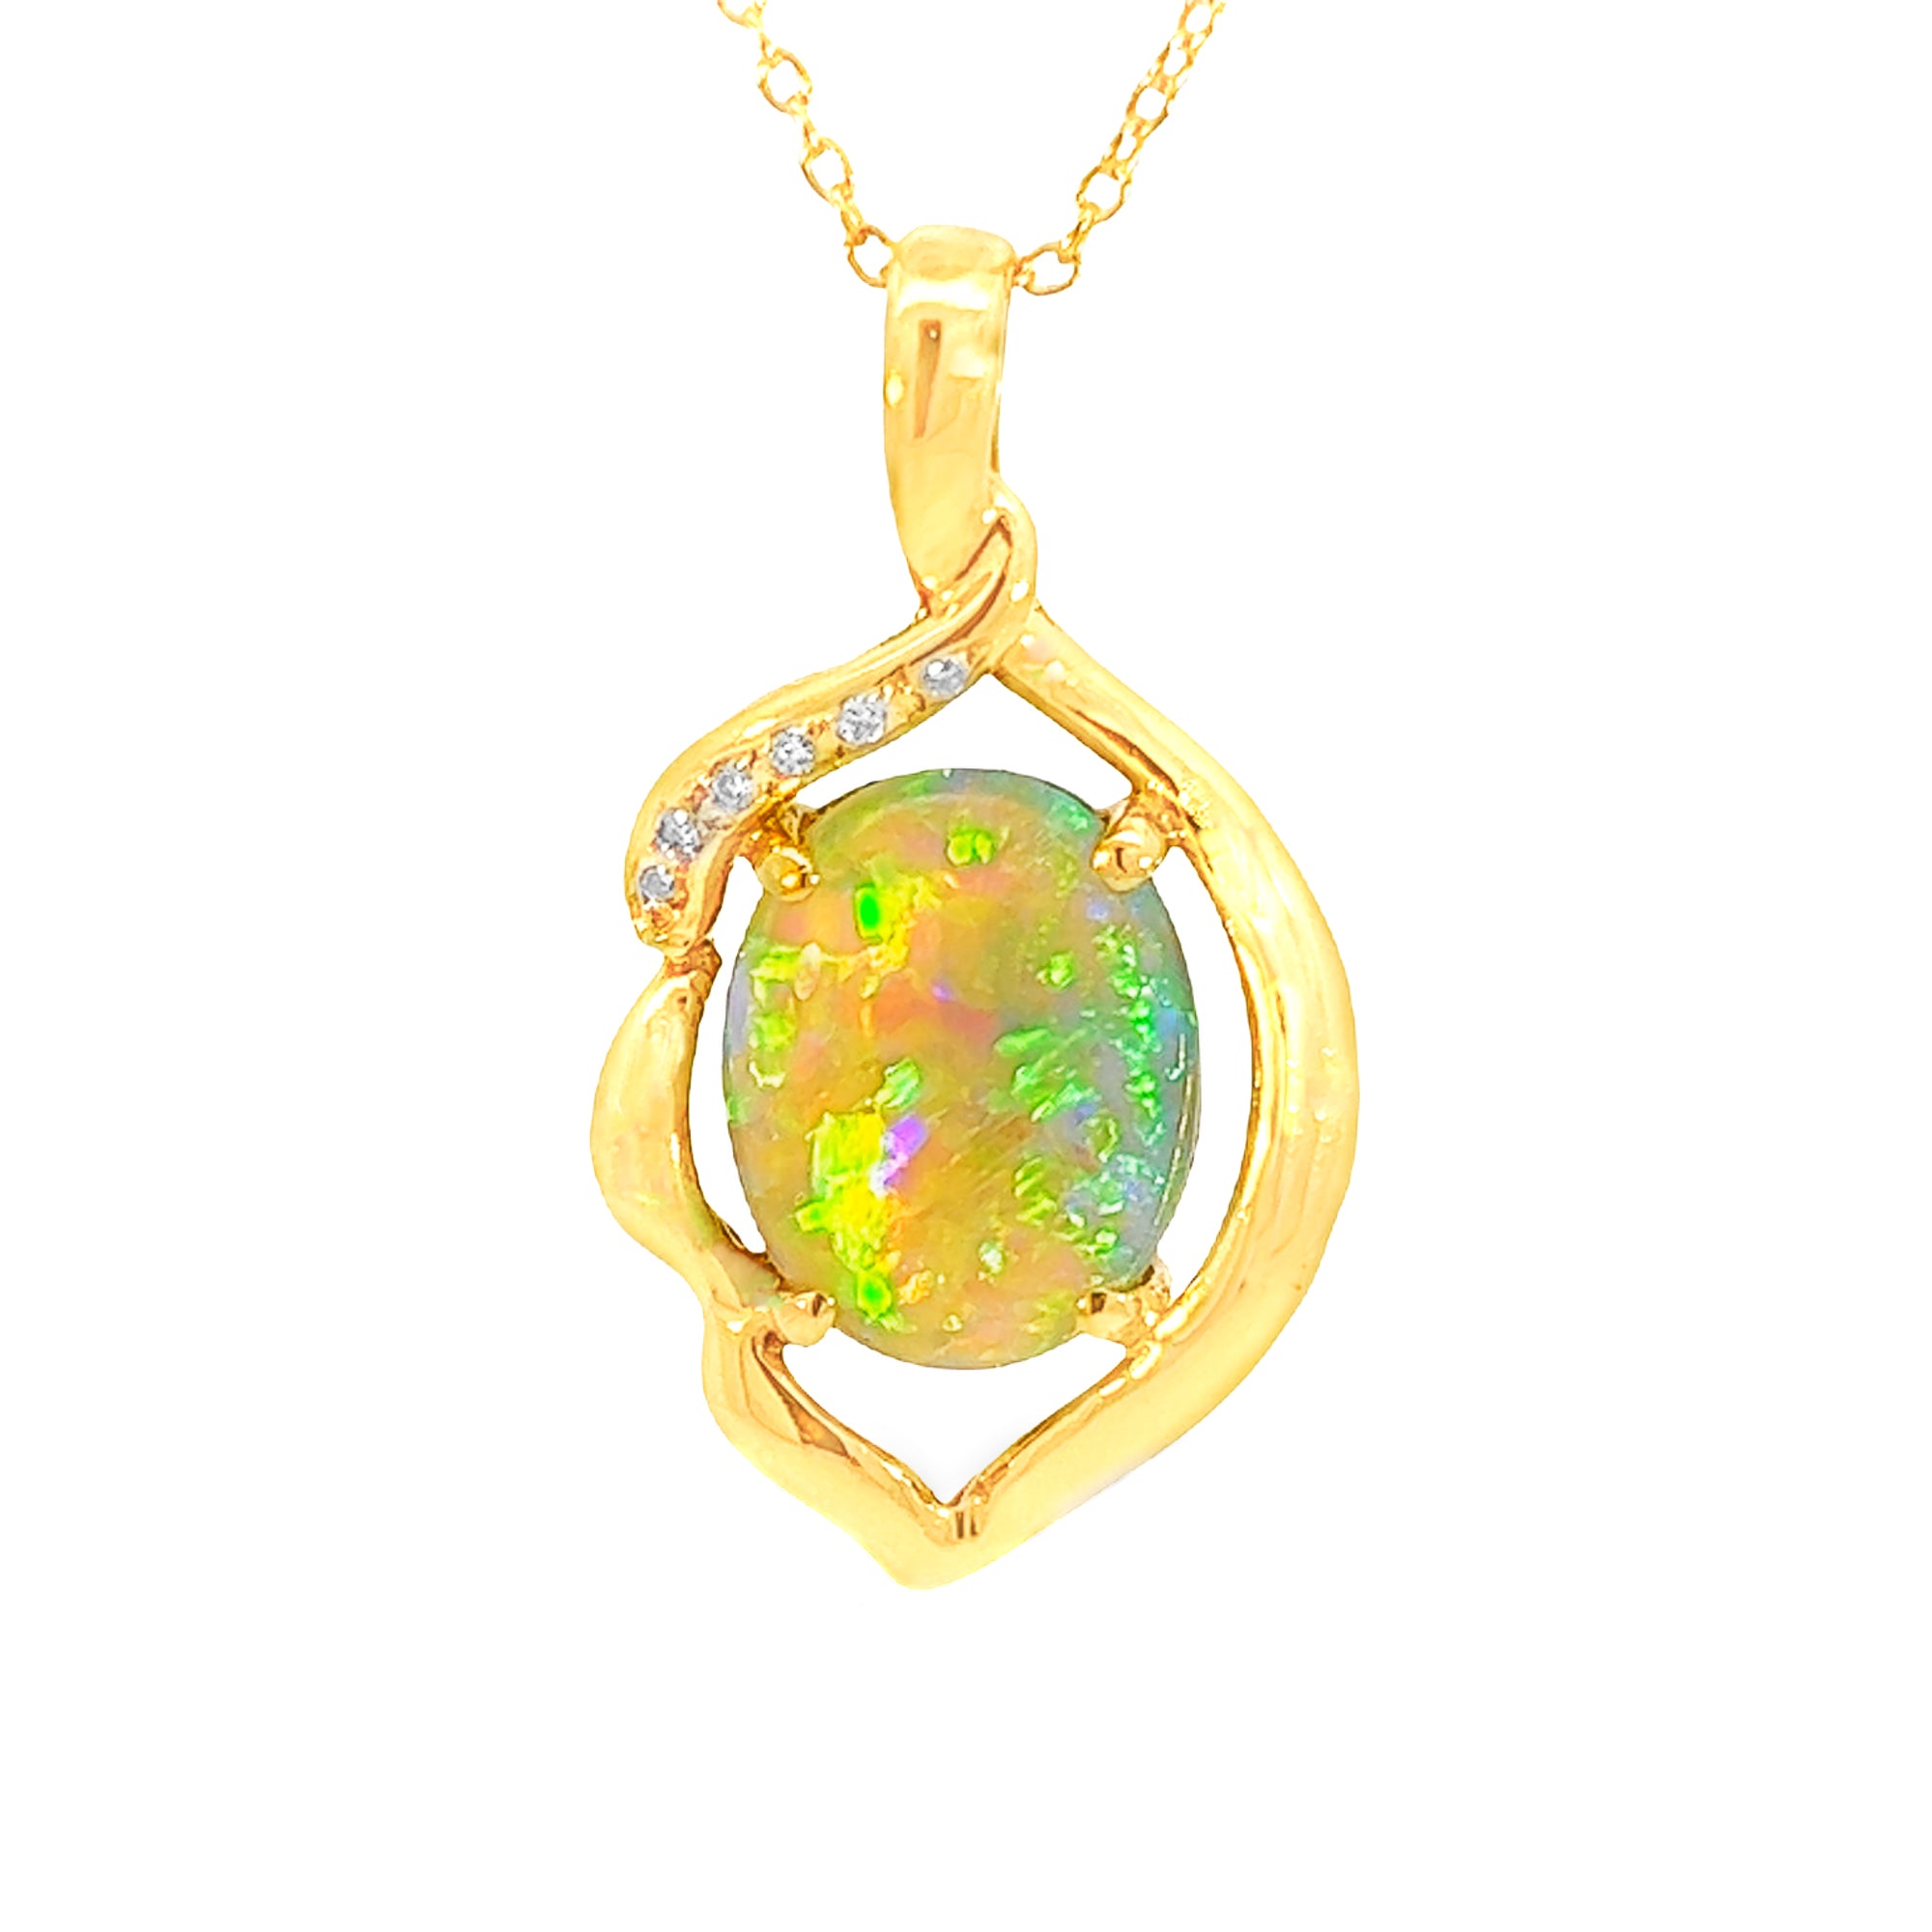 18Kt Yellow Gold Pendant - 4.19ct Black Opal and Diamond, Women's Necklace, Dainty Birthstone Jewelry, Opal Necklace, Perfect Gift for Her - Masterpiece Jewellery Opal & Gems Sydney Australia | Online Shop